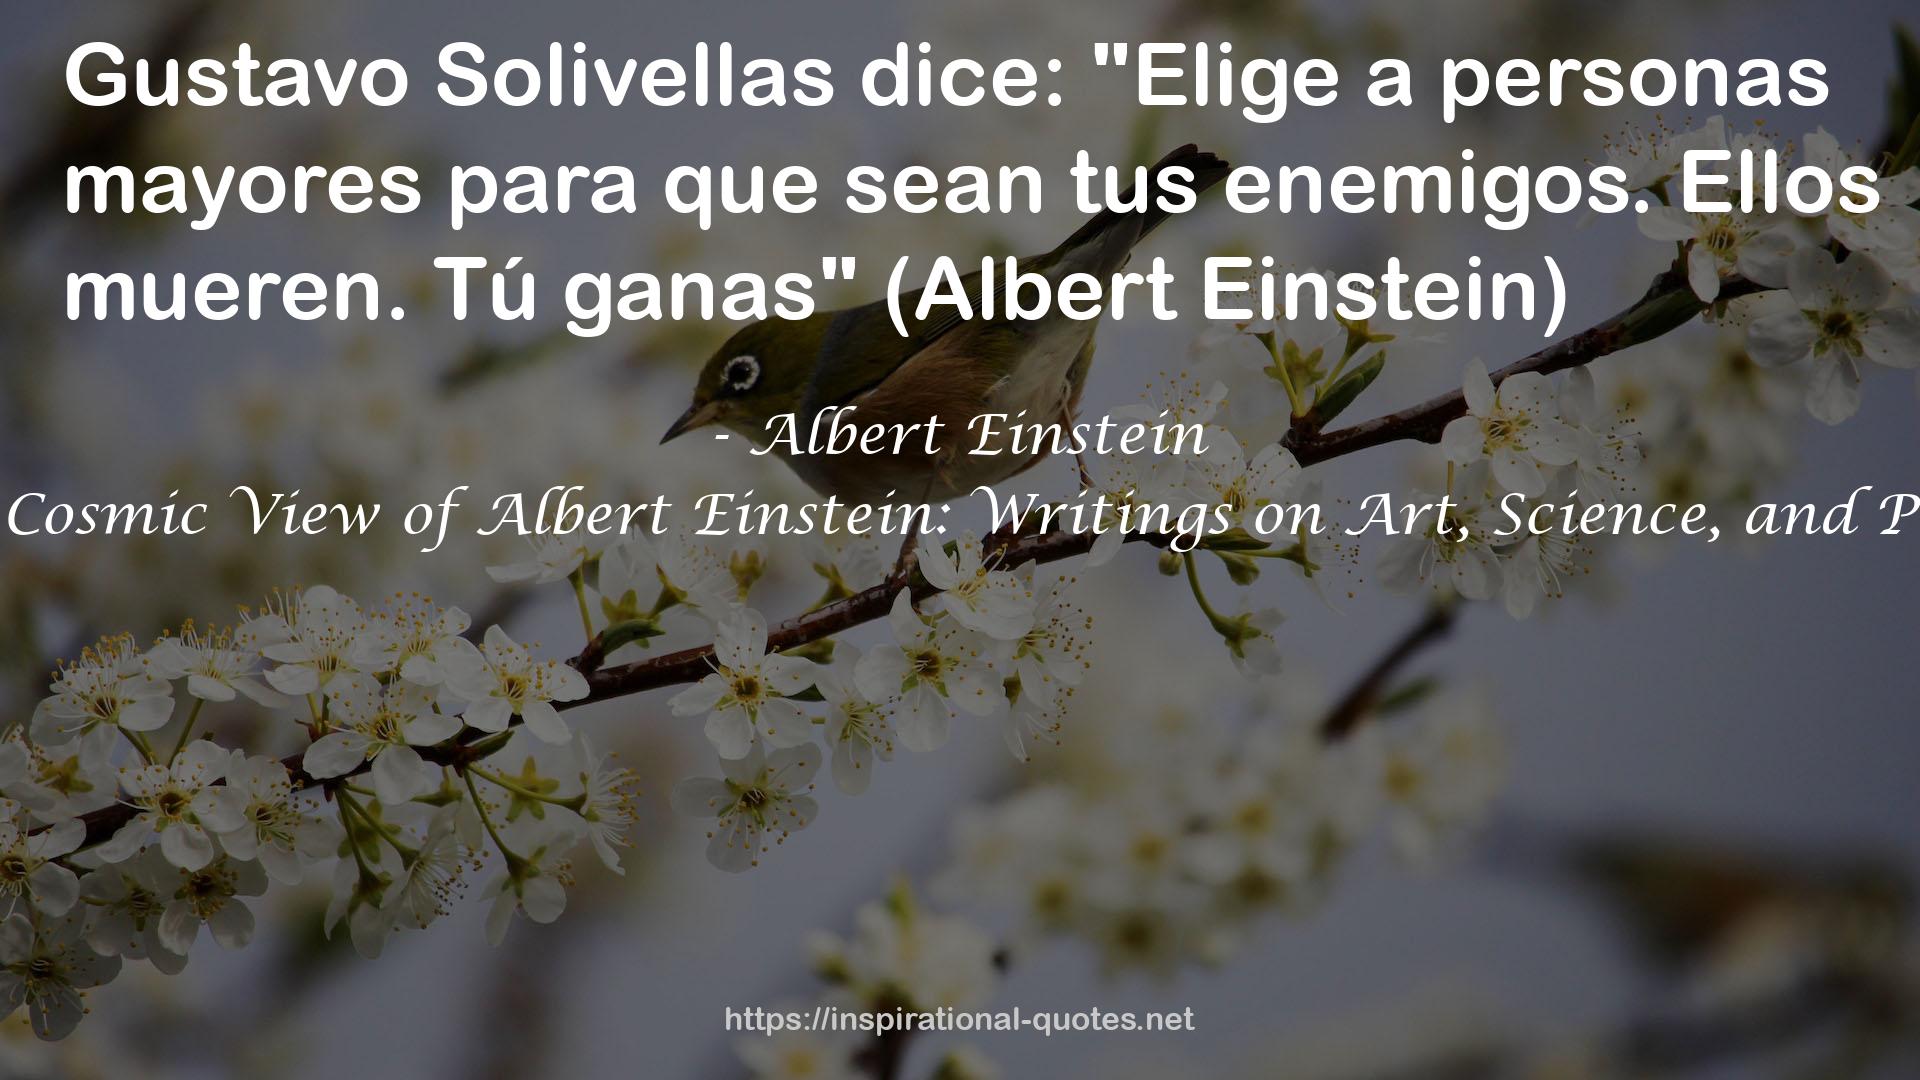 The Cosmic View of Albert Einstein: Writings on Art, Science, and Peace QUOTES